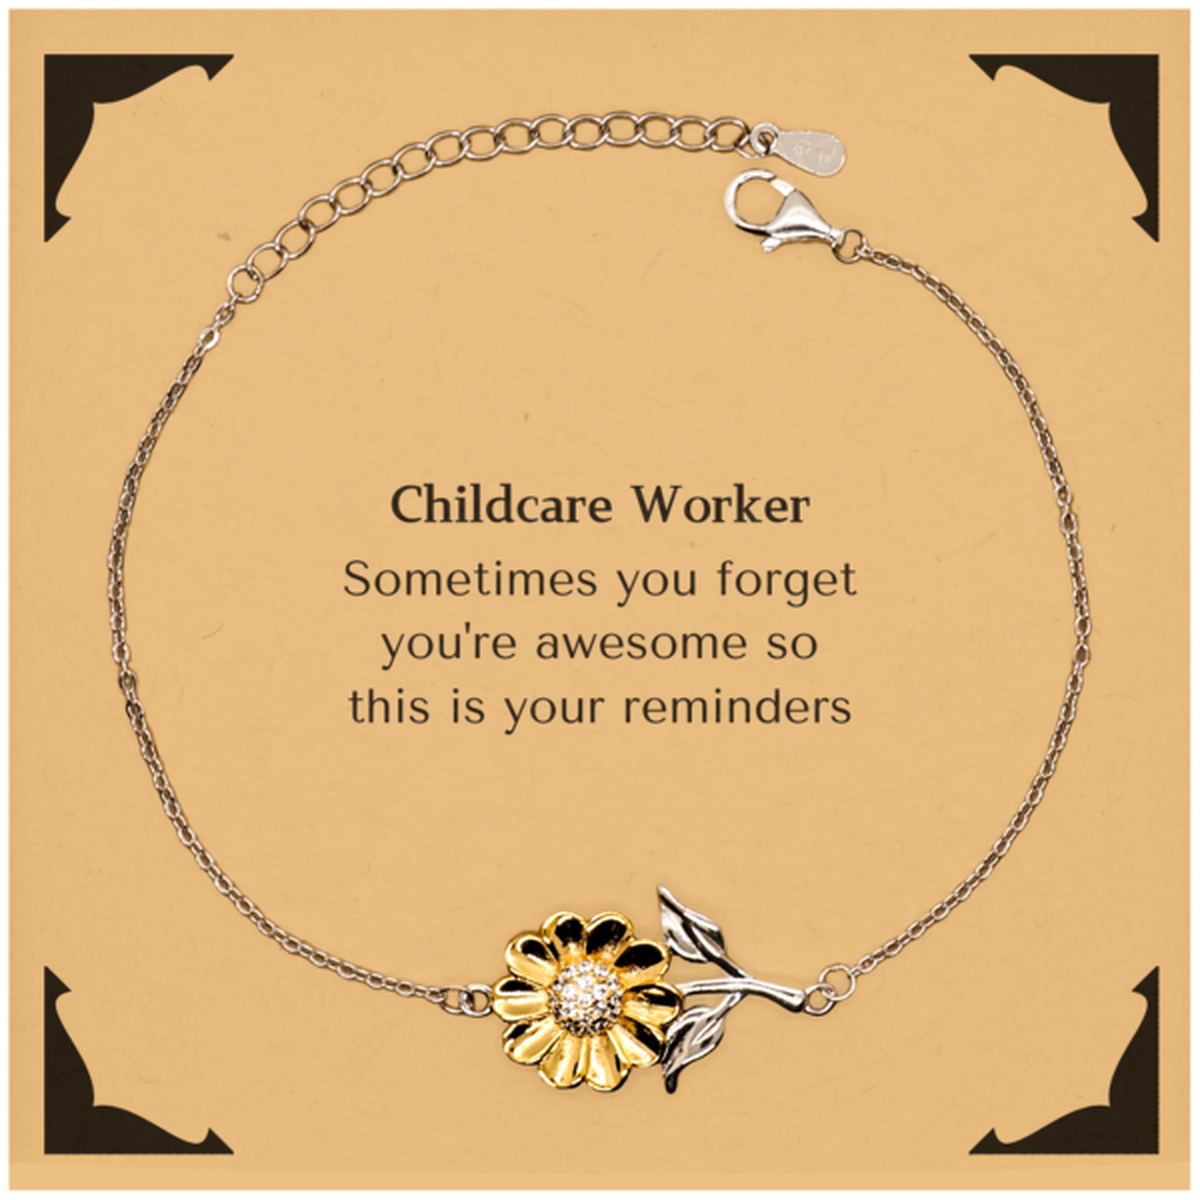 Sentimental Childcare Worker Sunflower Bracelet, Childcare Worker Sometimes you forget you're awesome so this is your reminders, Graduation Christmas Birthday Gifts for Childcare Worker, Men, Women, Coworkers